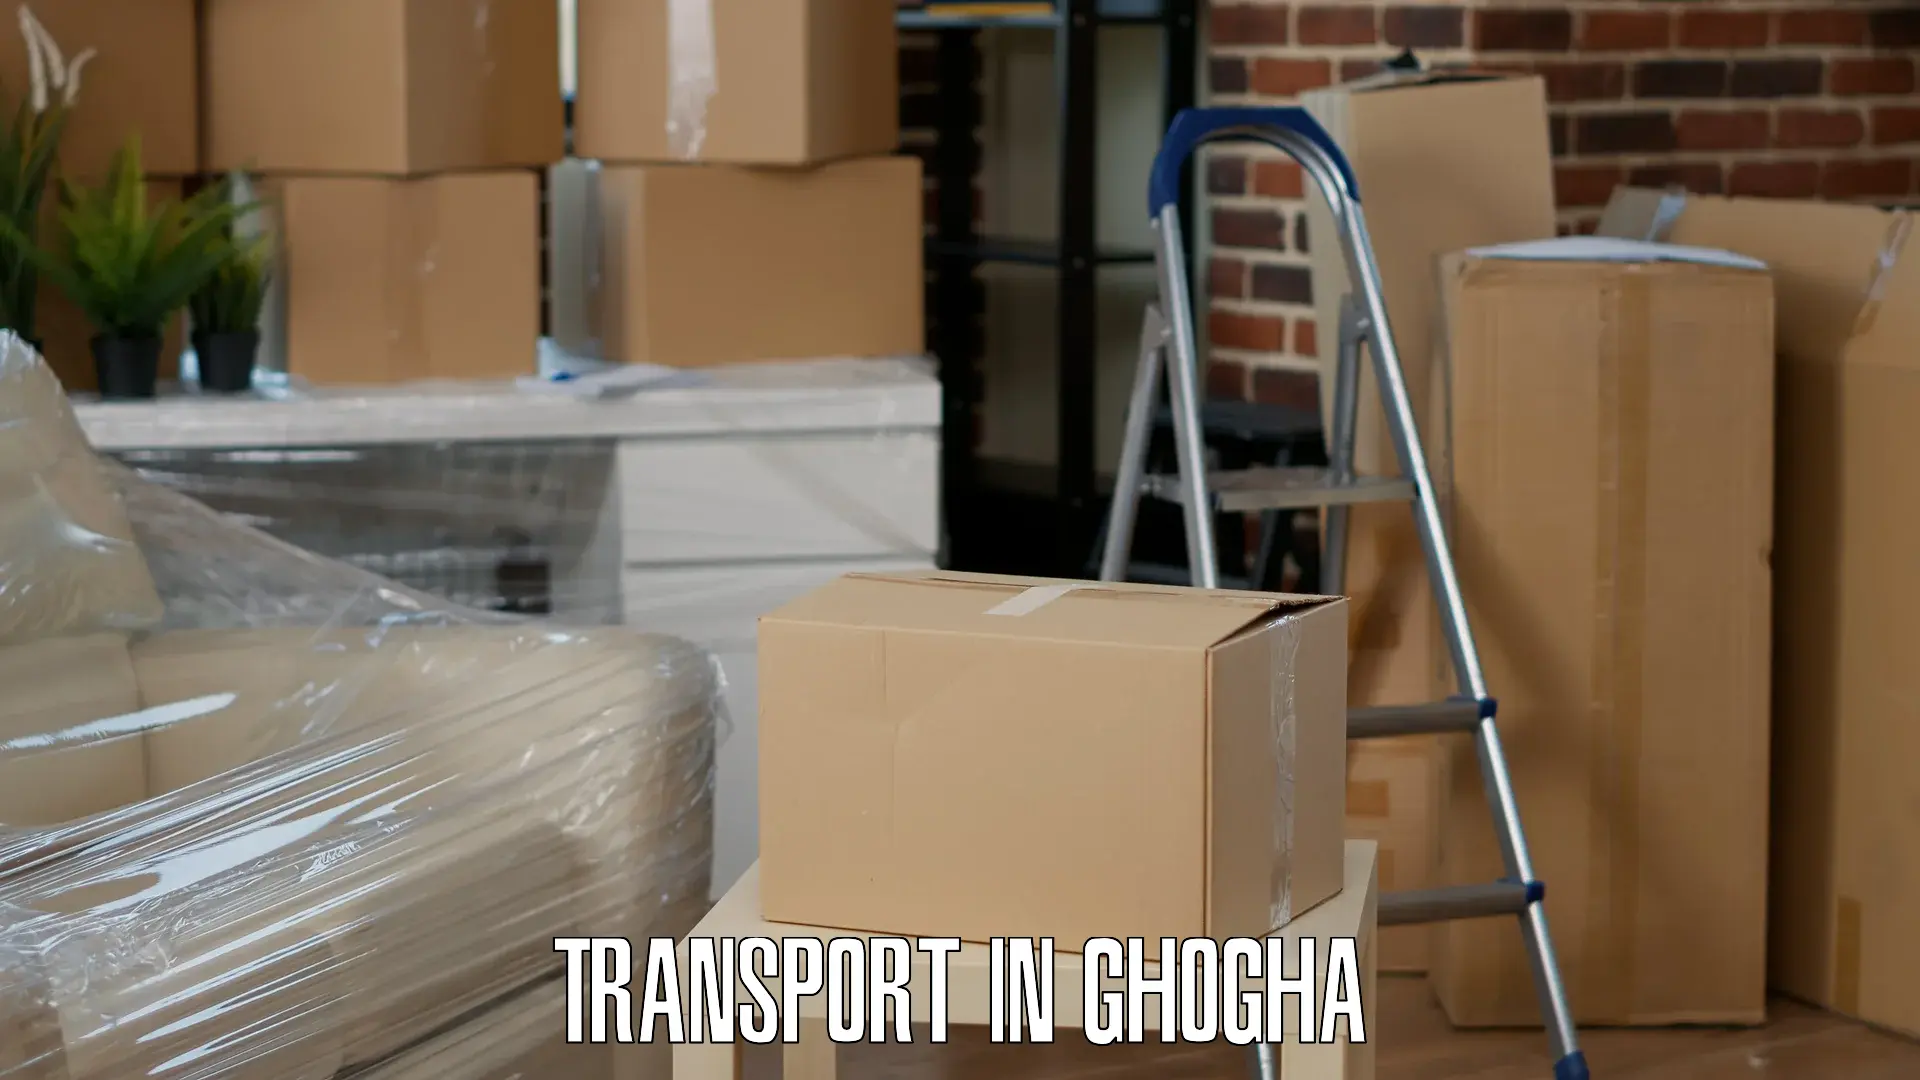 Container transport service in Ghogha